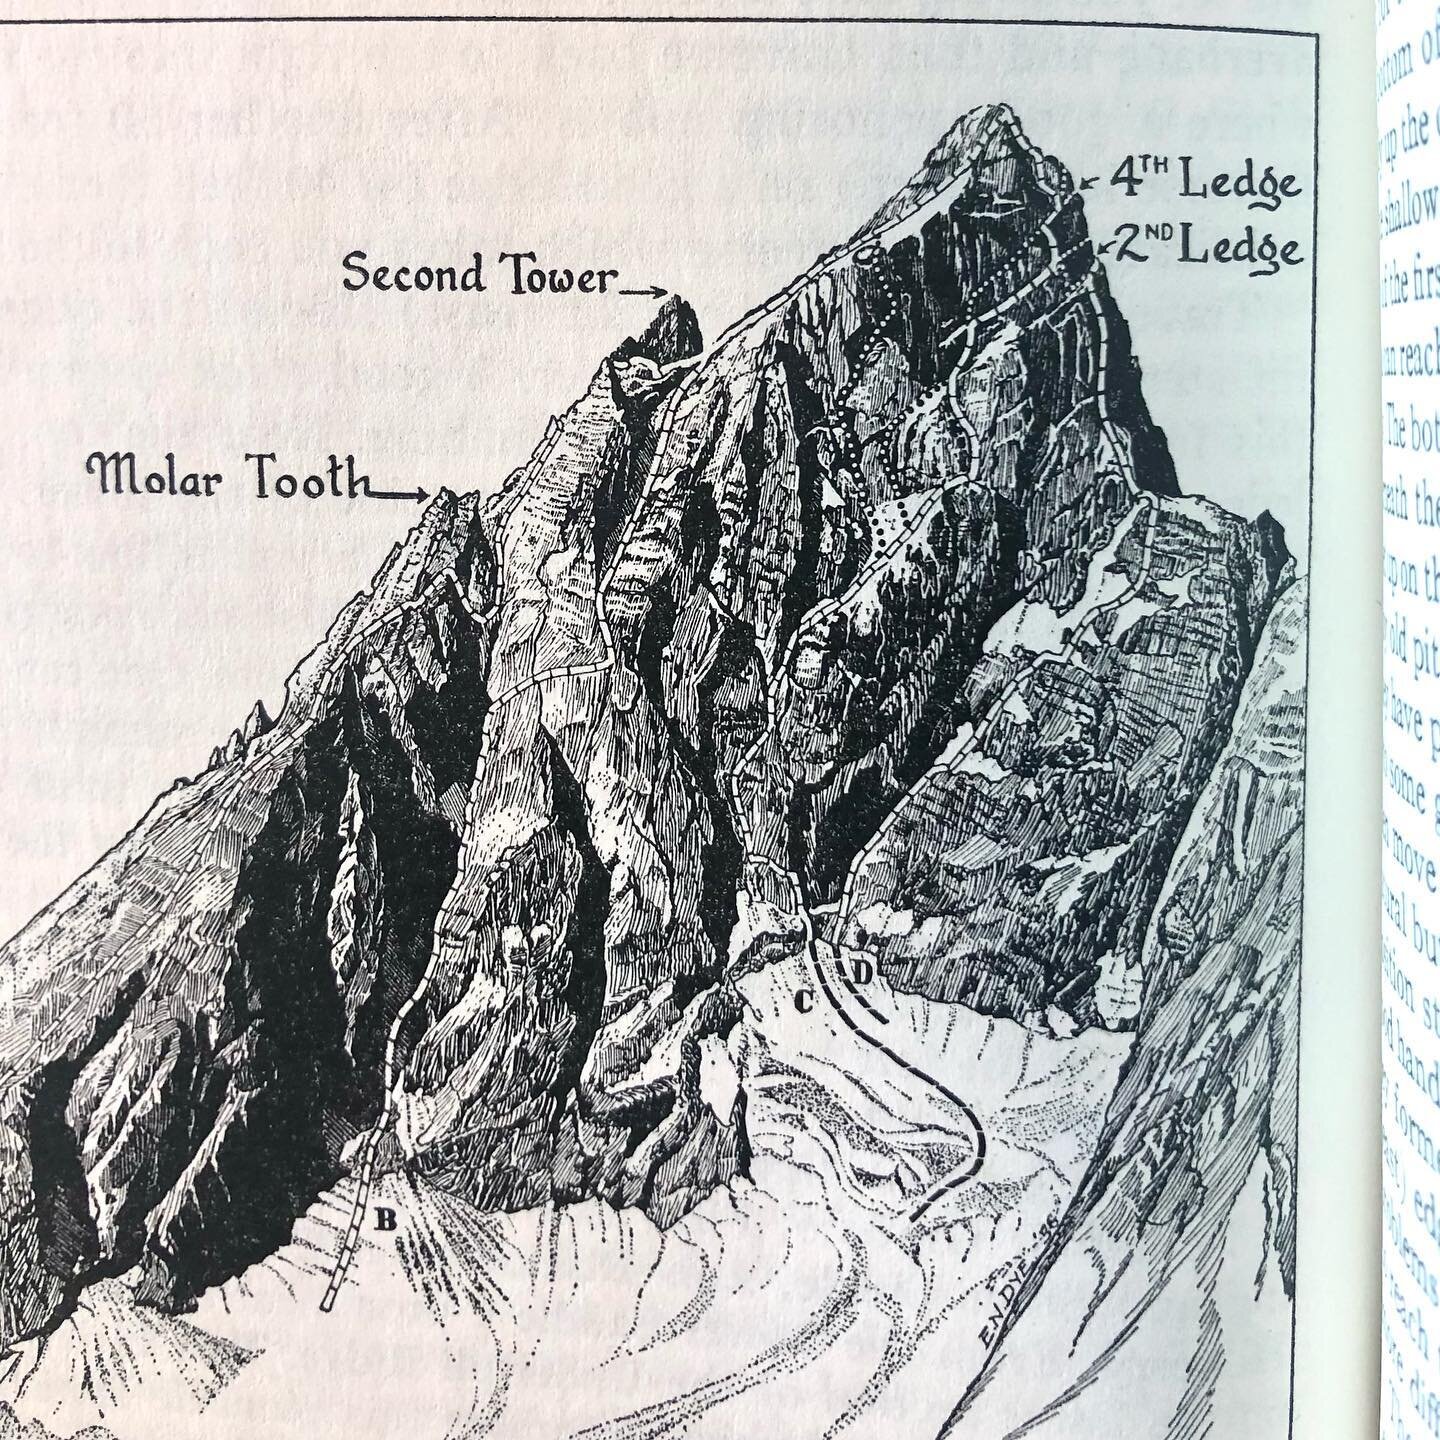 Early guidebooks double as history books and gazetteers, documenting when features were named, when they were first climbed, and how the landscape might have changed through things like rockfall or glacier recession. Pictured here, the first edition 